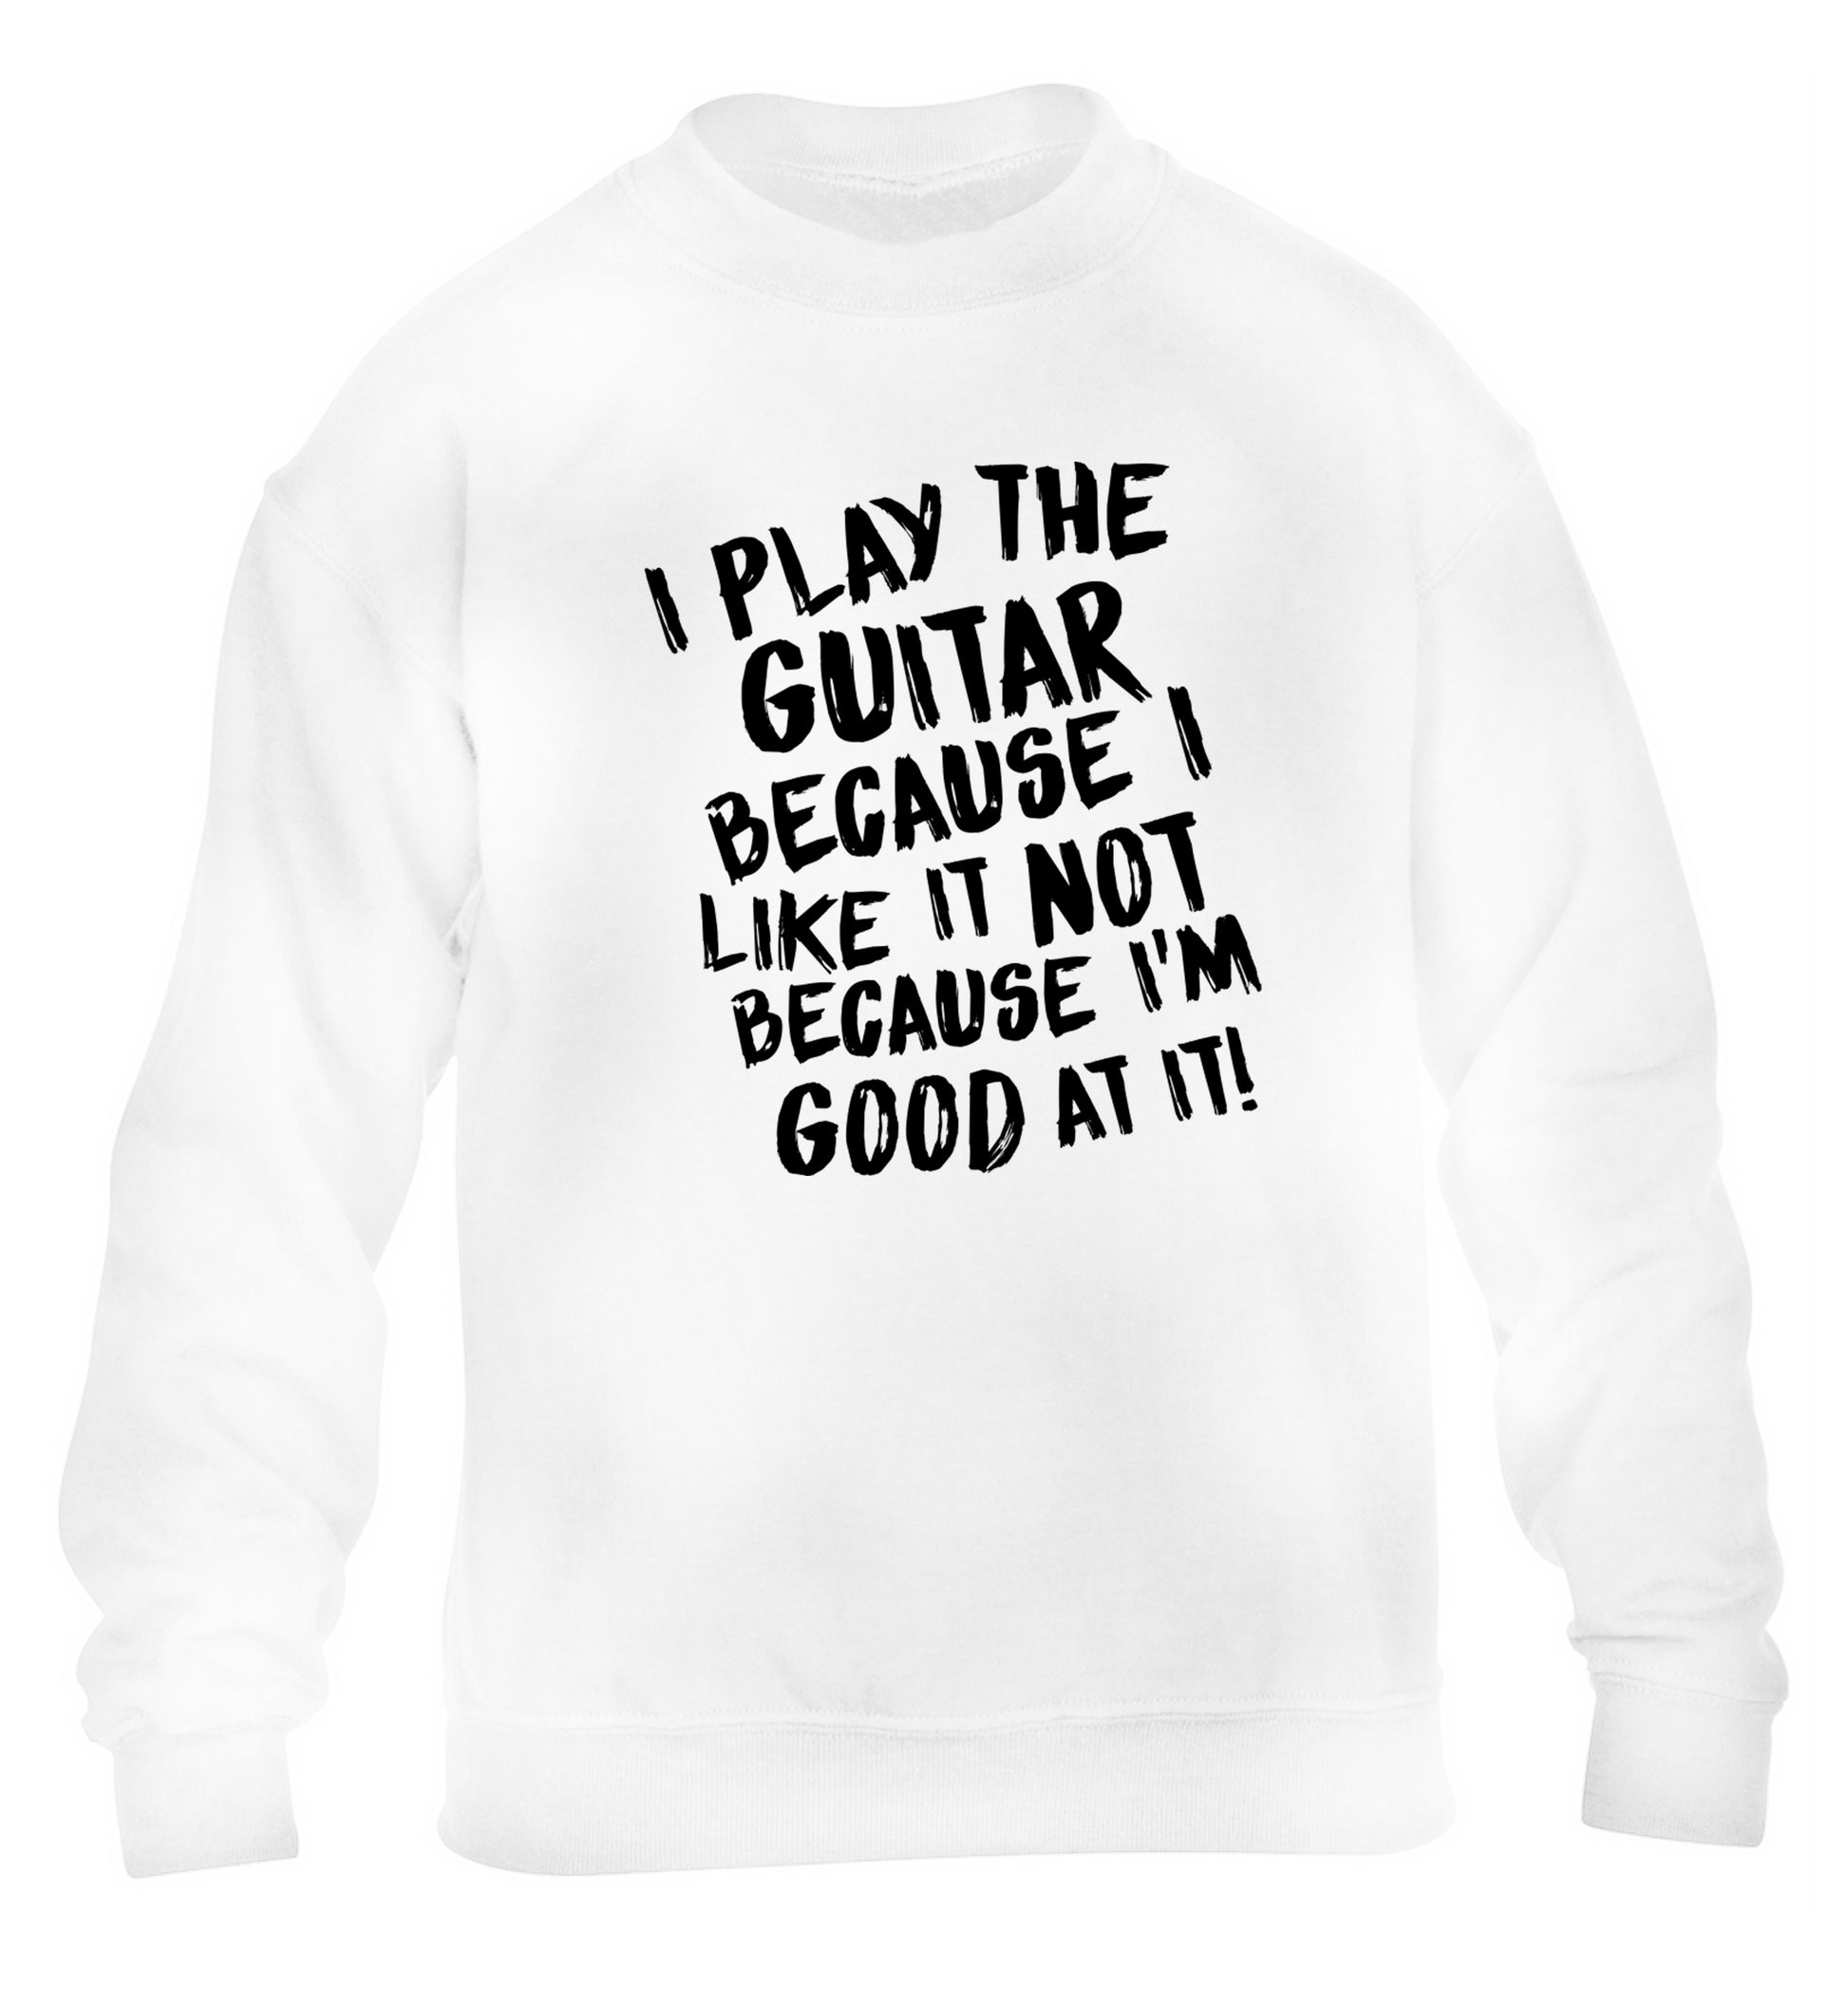 I play the guitar because I like it not because I'm good at it children's white sweater 12-14 Years